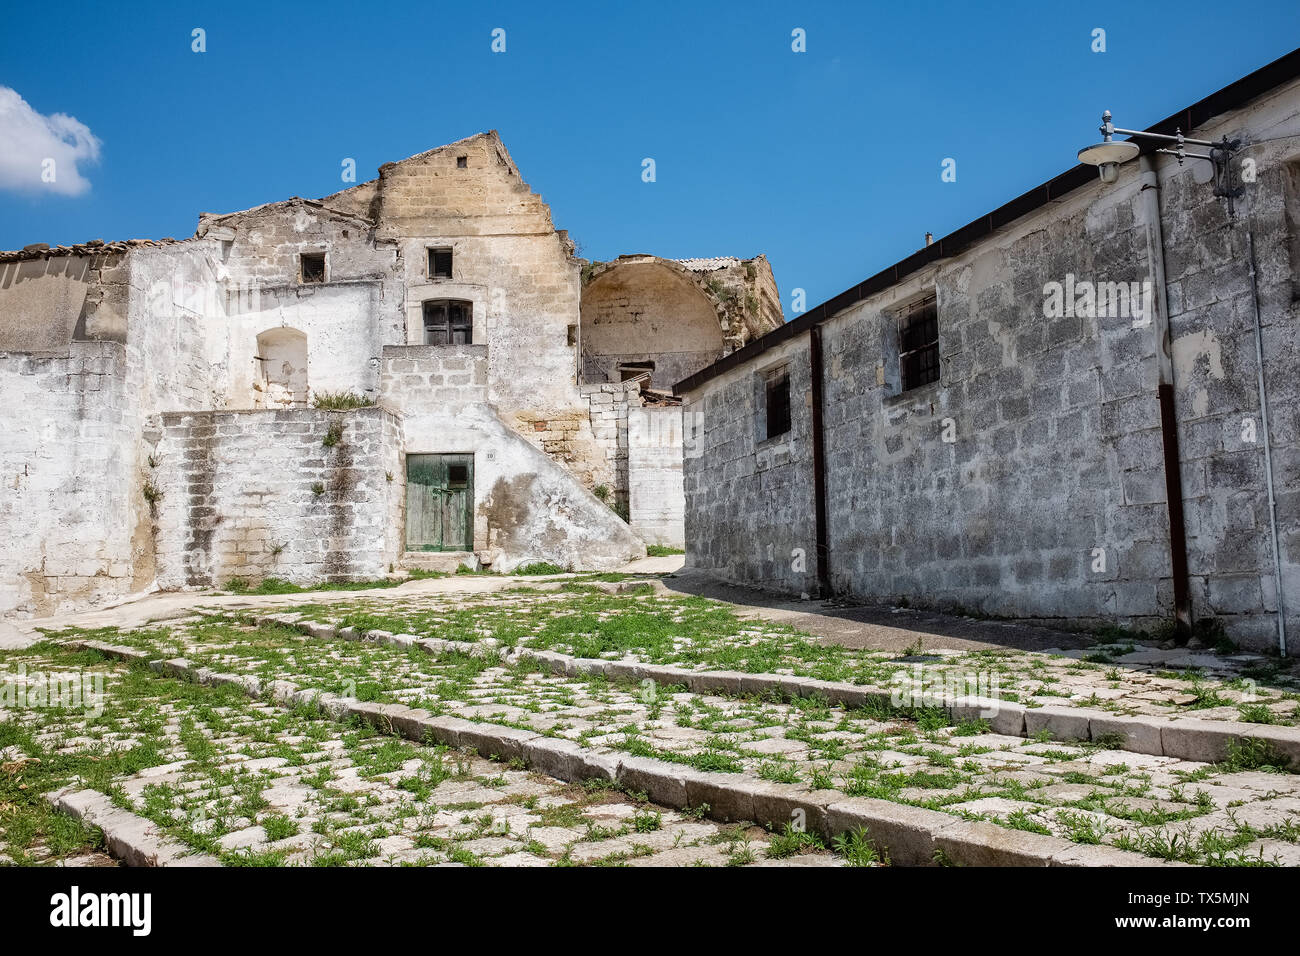 Typical old town houses. Spinazzola, Apulia region, Italy Stock Photo